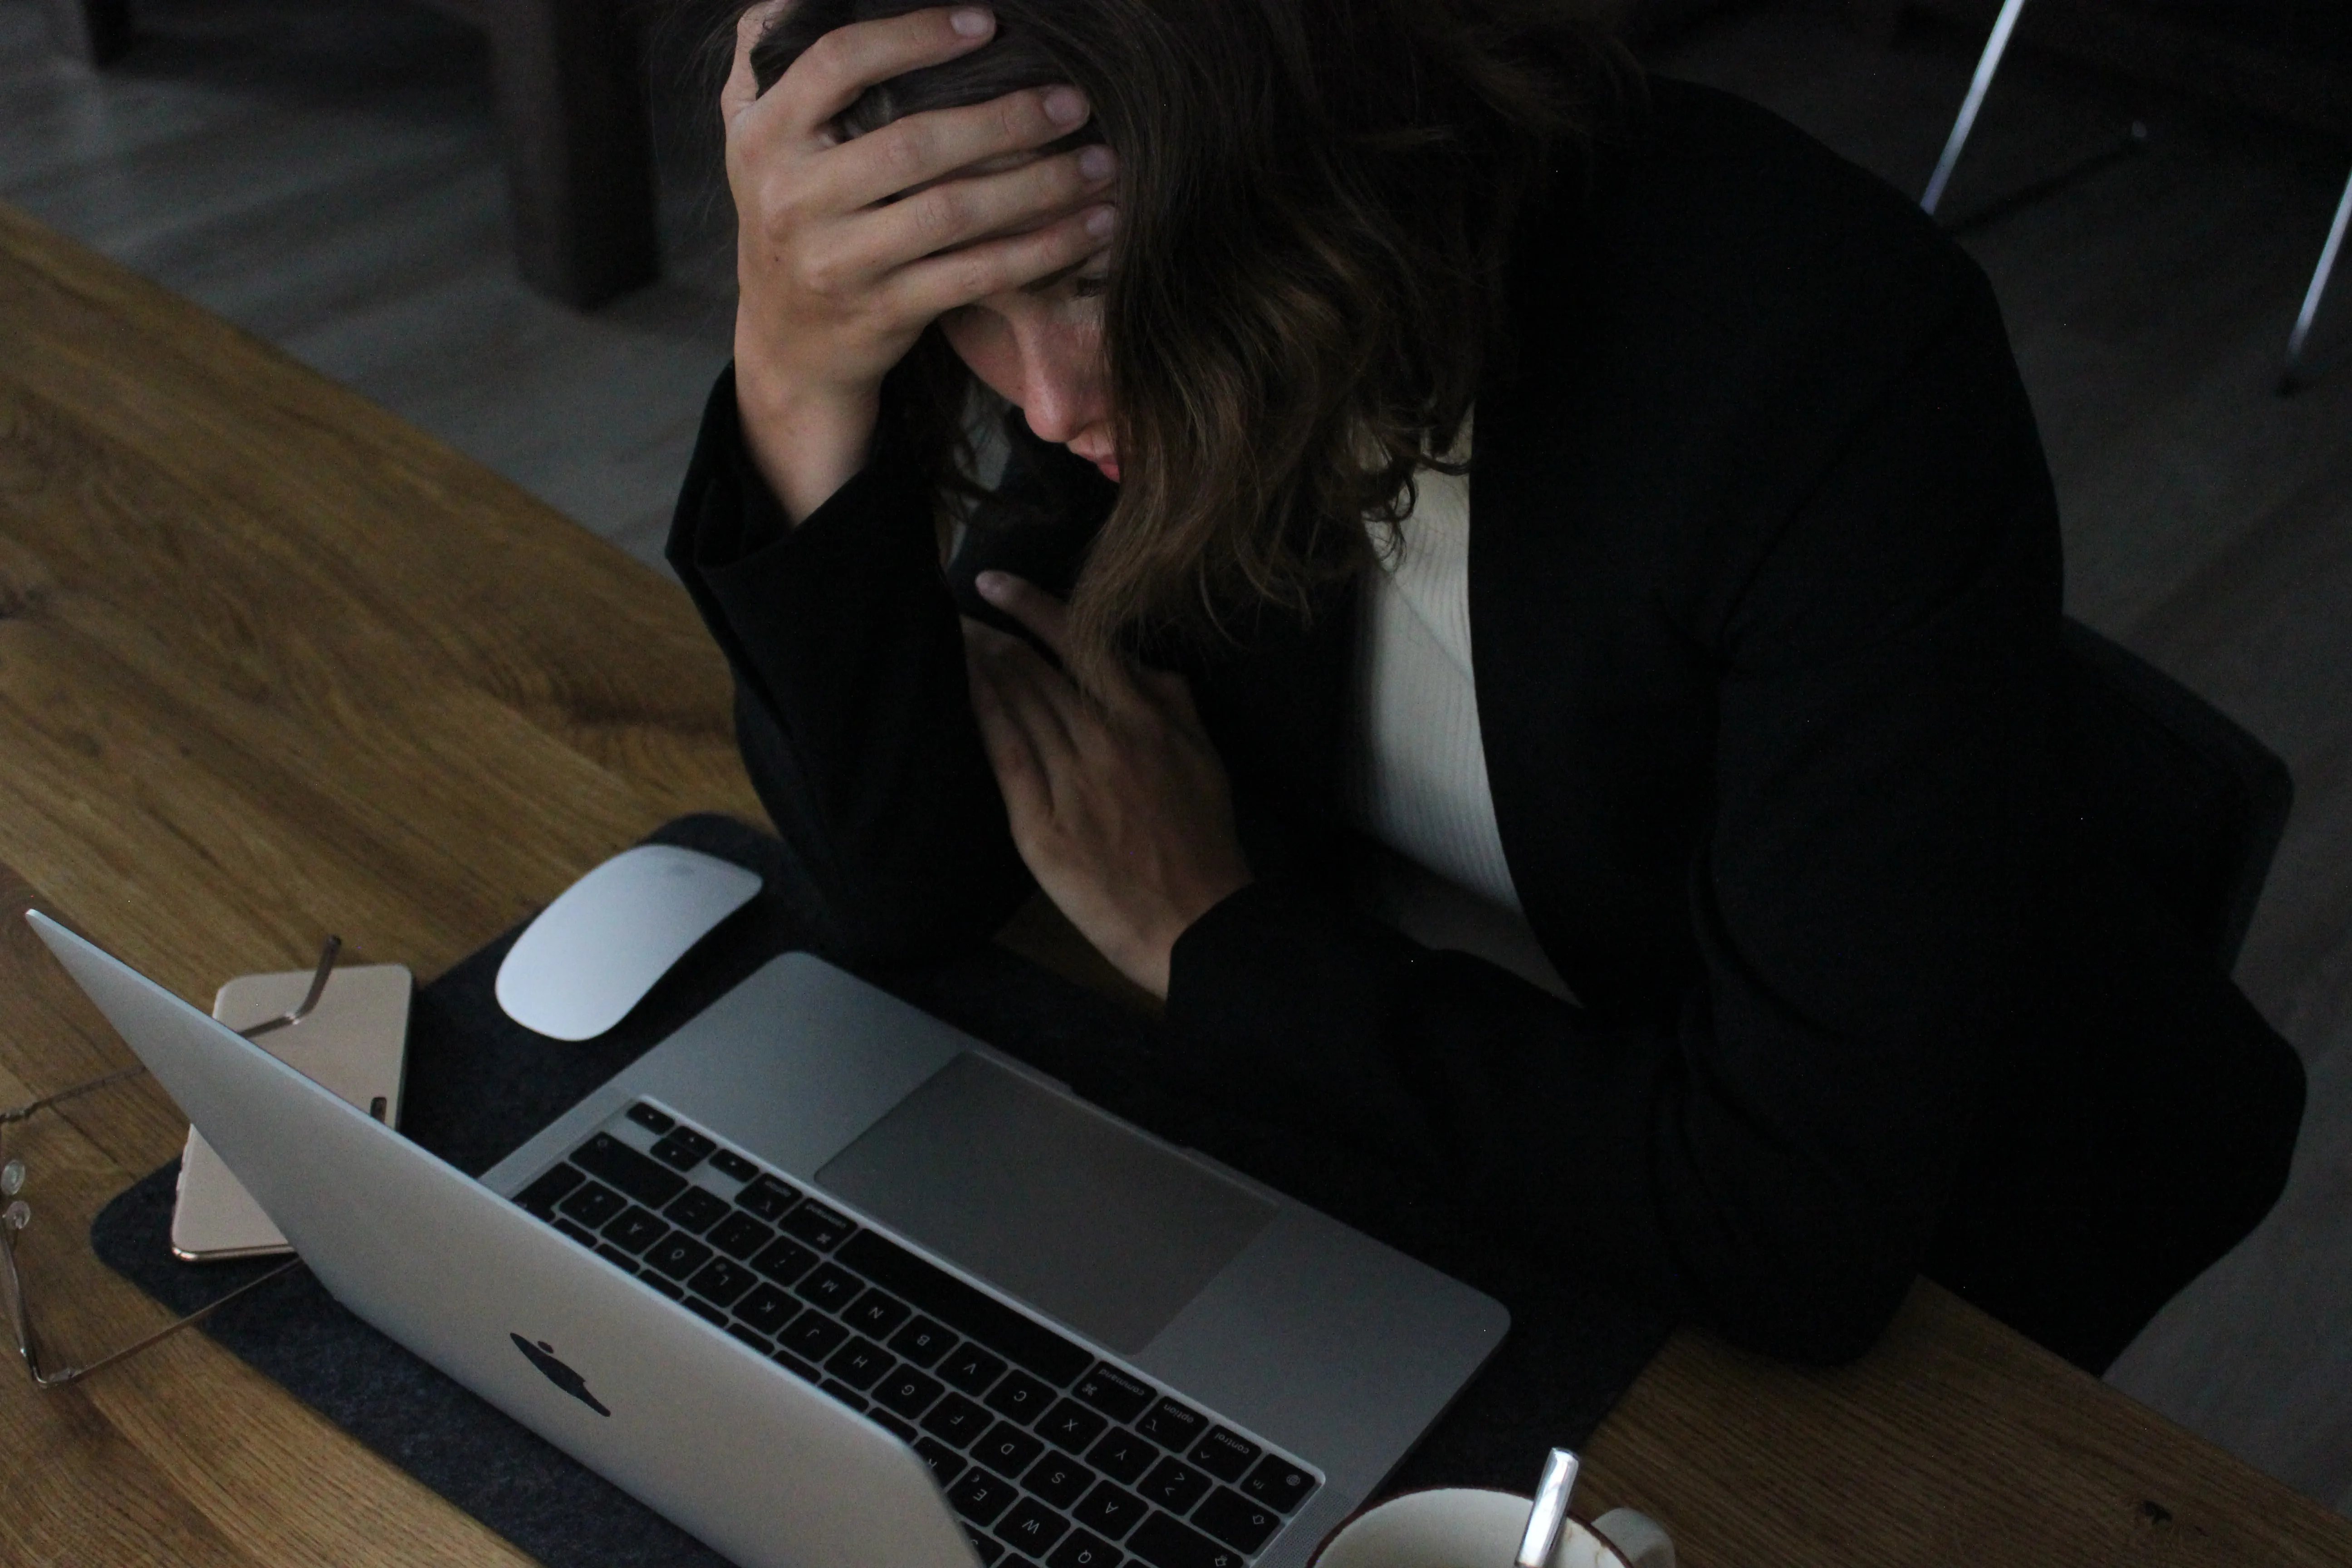 6 Exhausting Beliefs That Lead Straight To Emotional Burnout